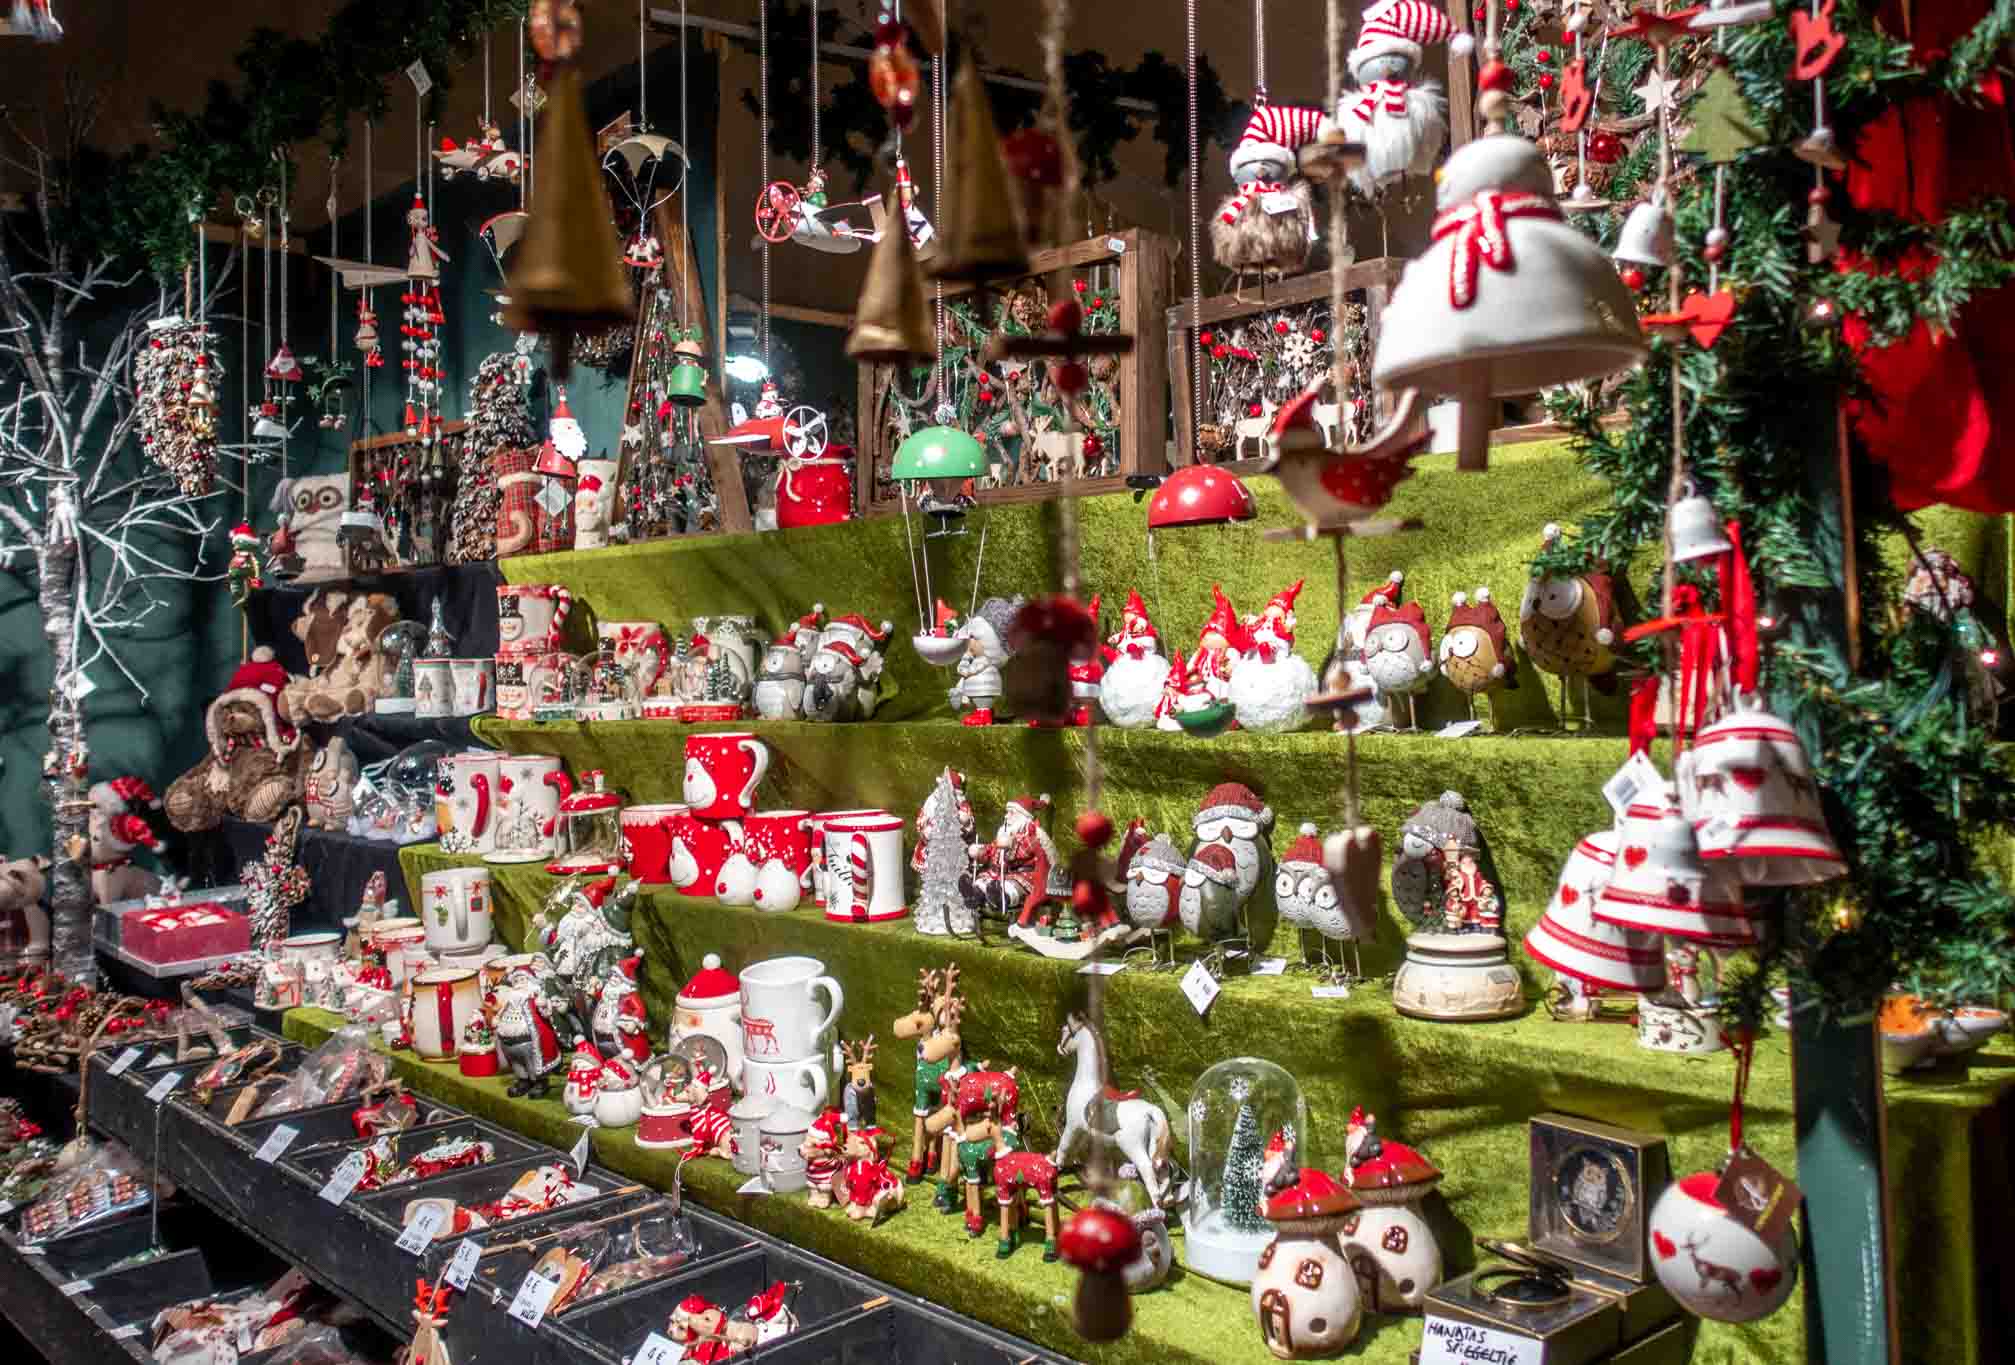 Christmas ornaments and decorations